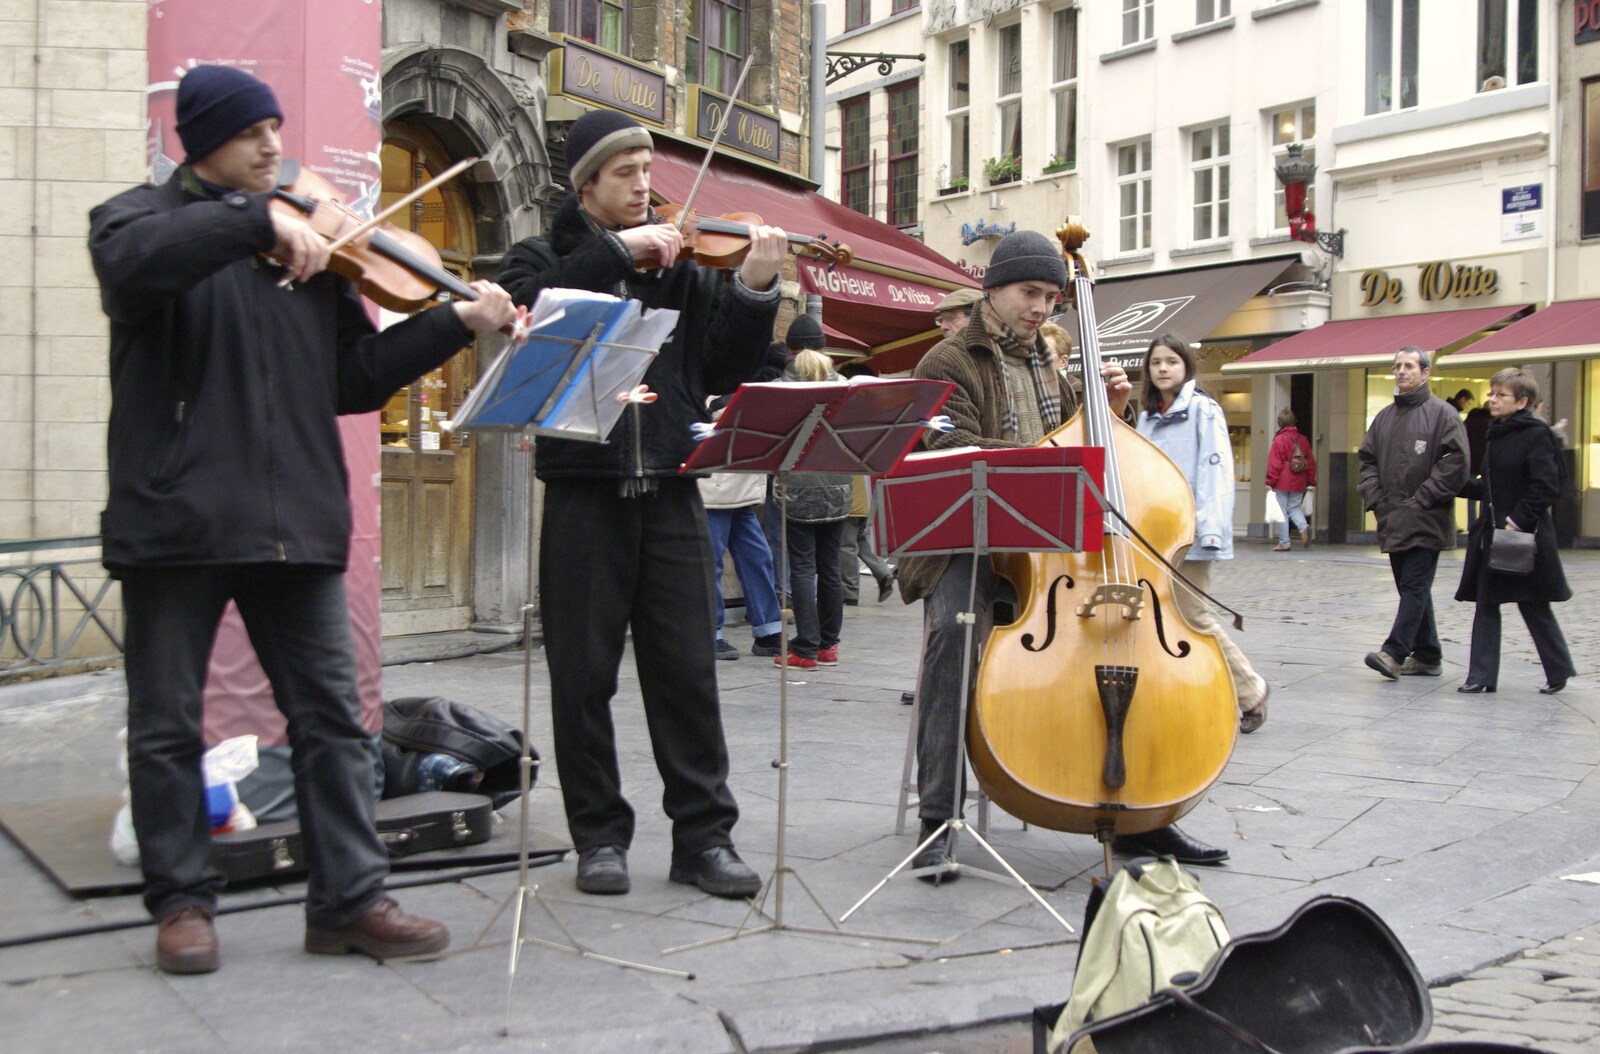 A bit of classical busking from The Christmas Markets of Brussels, Belgium - 1st January 2007